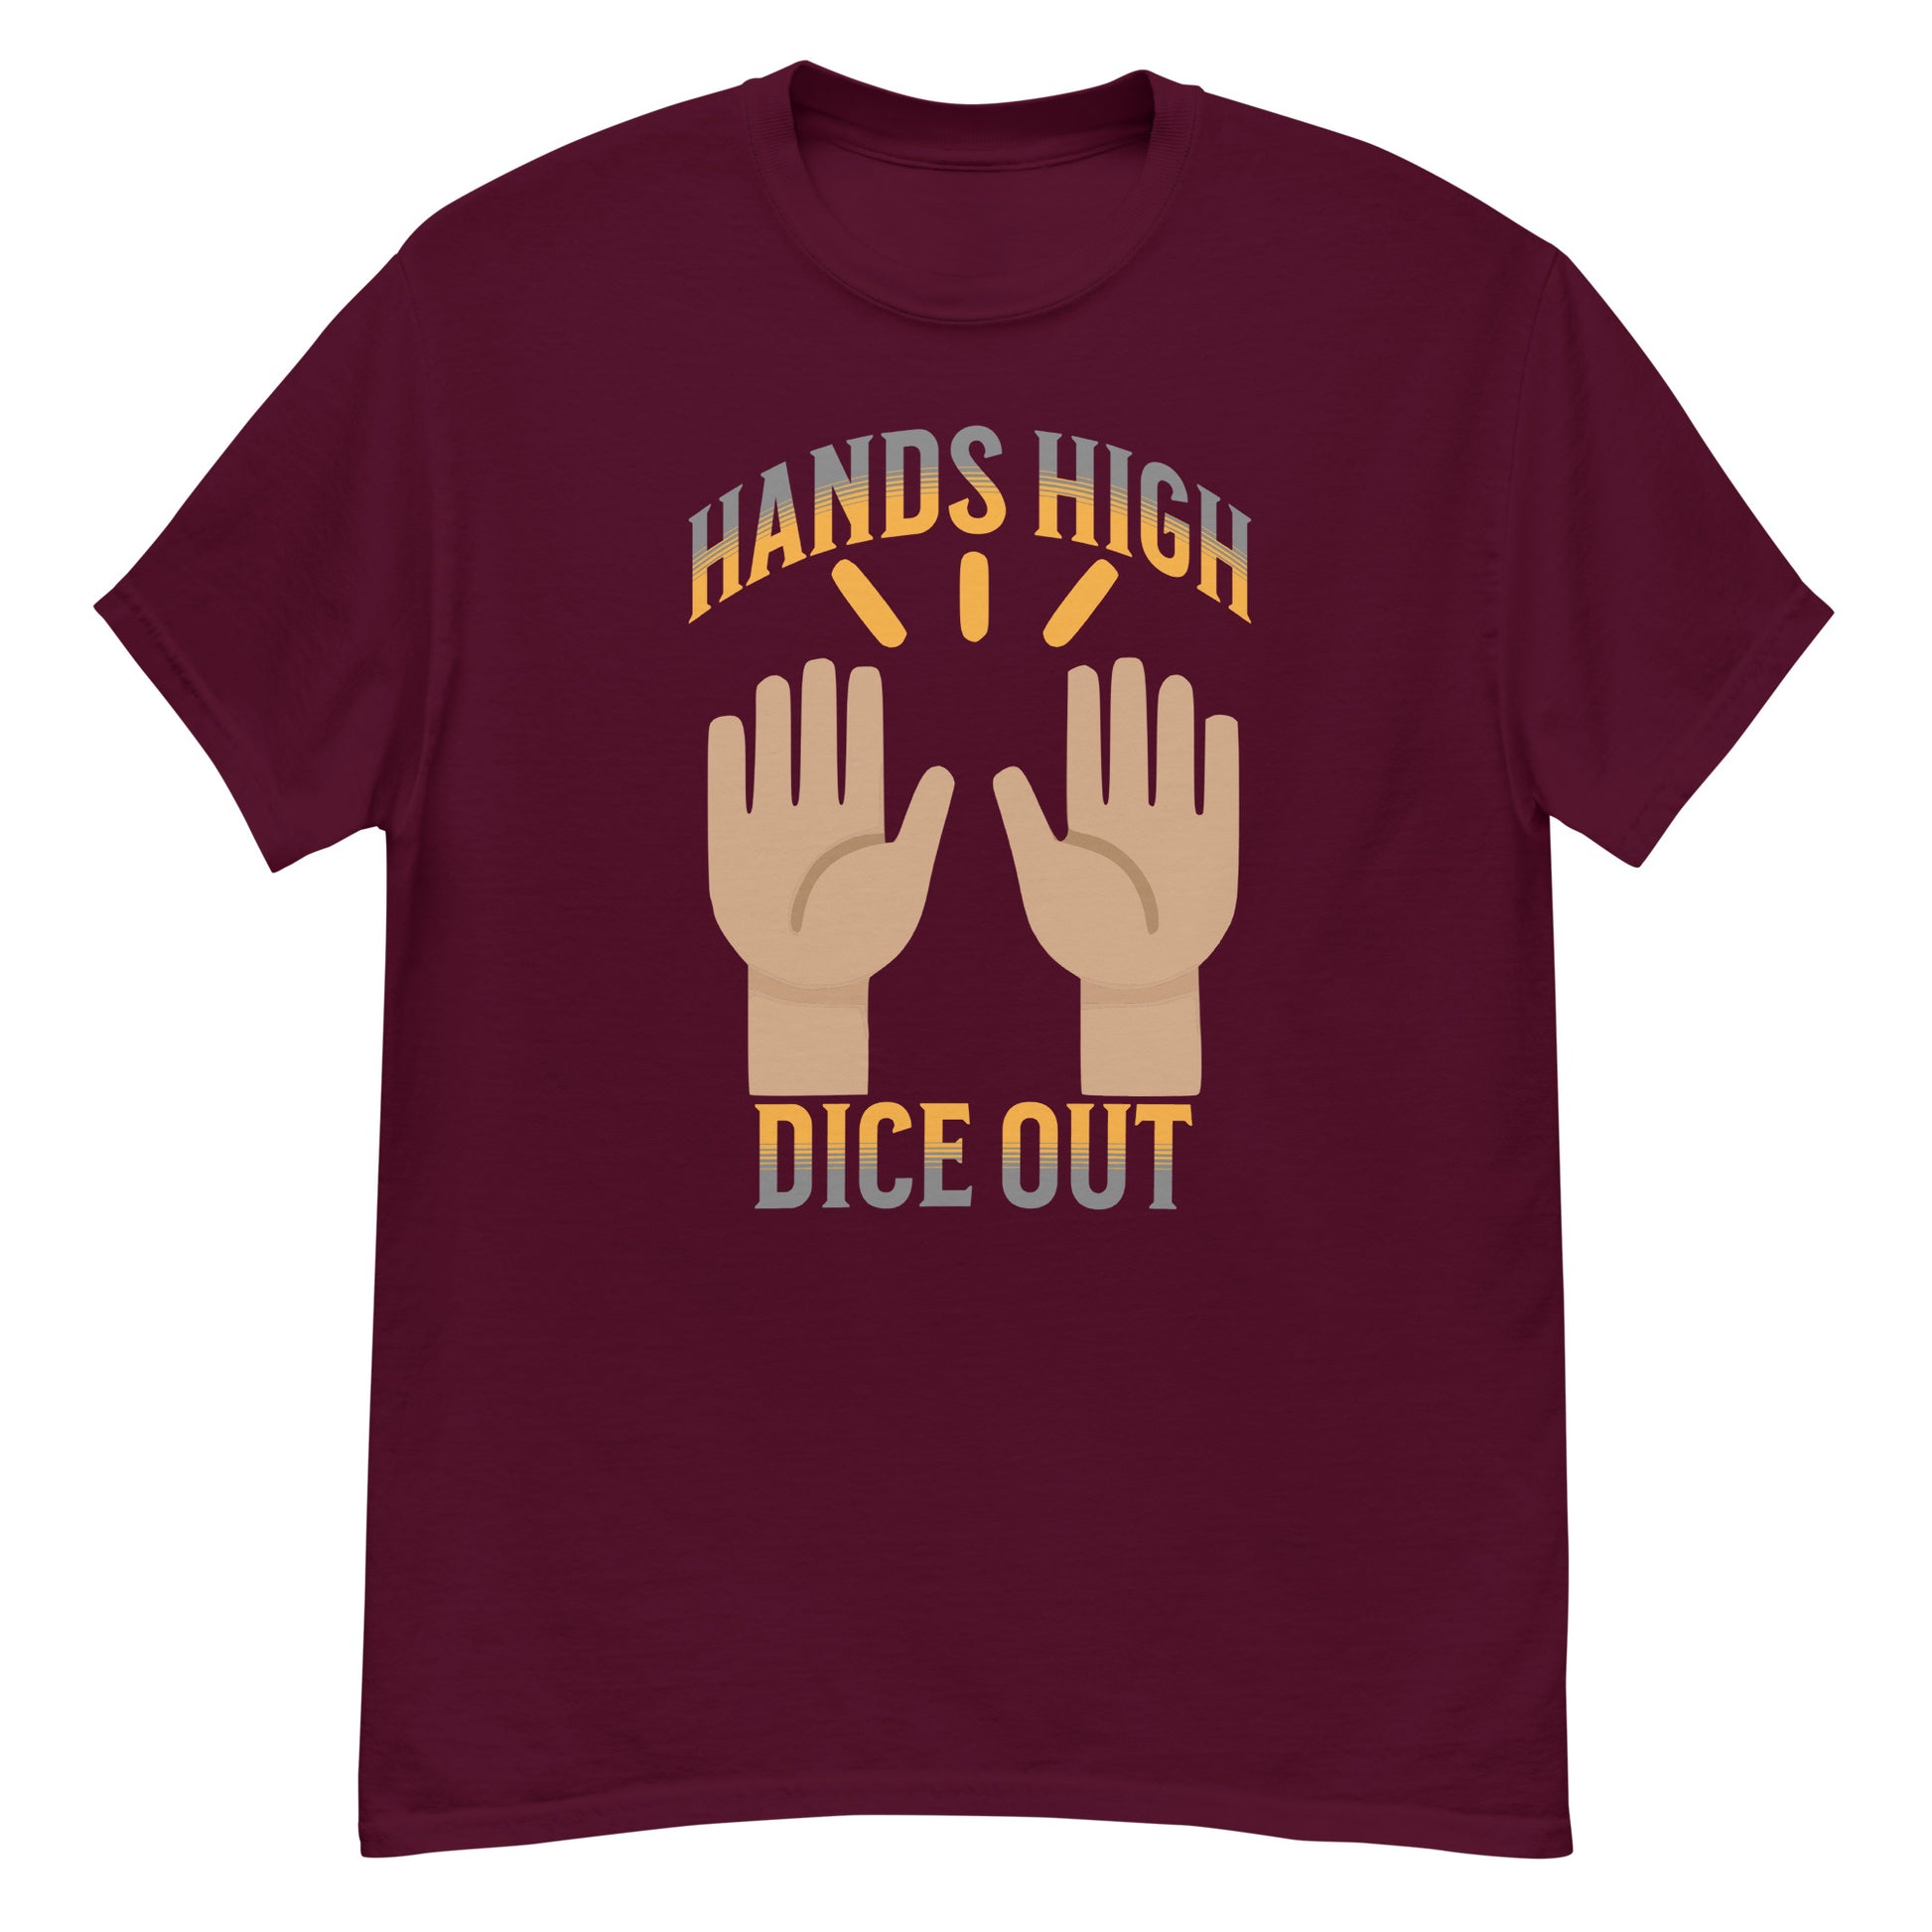 Hands High Dice Out Craps and dice Shirt